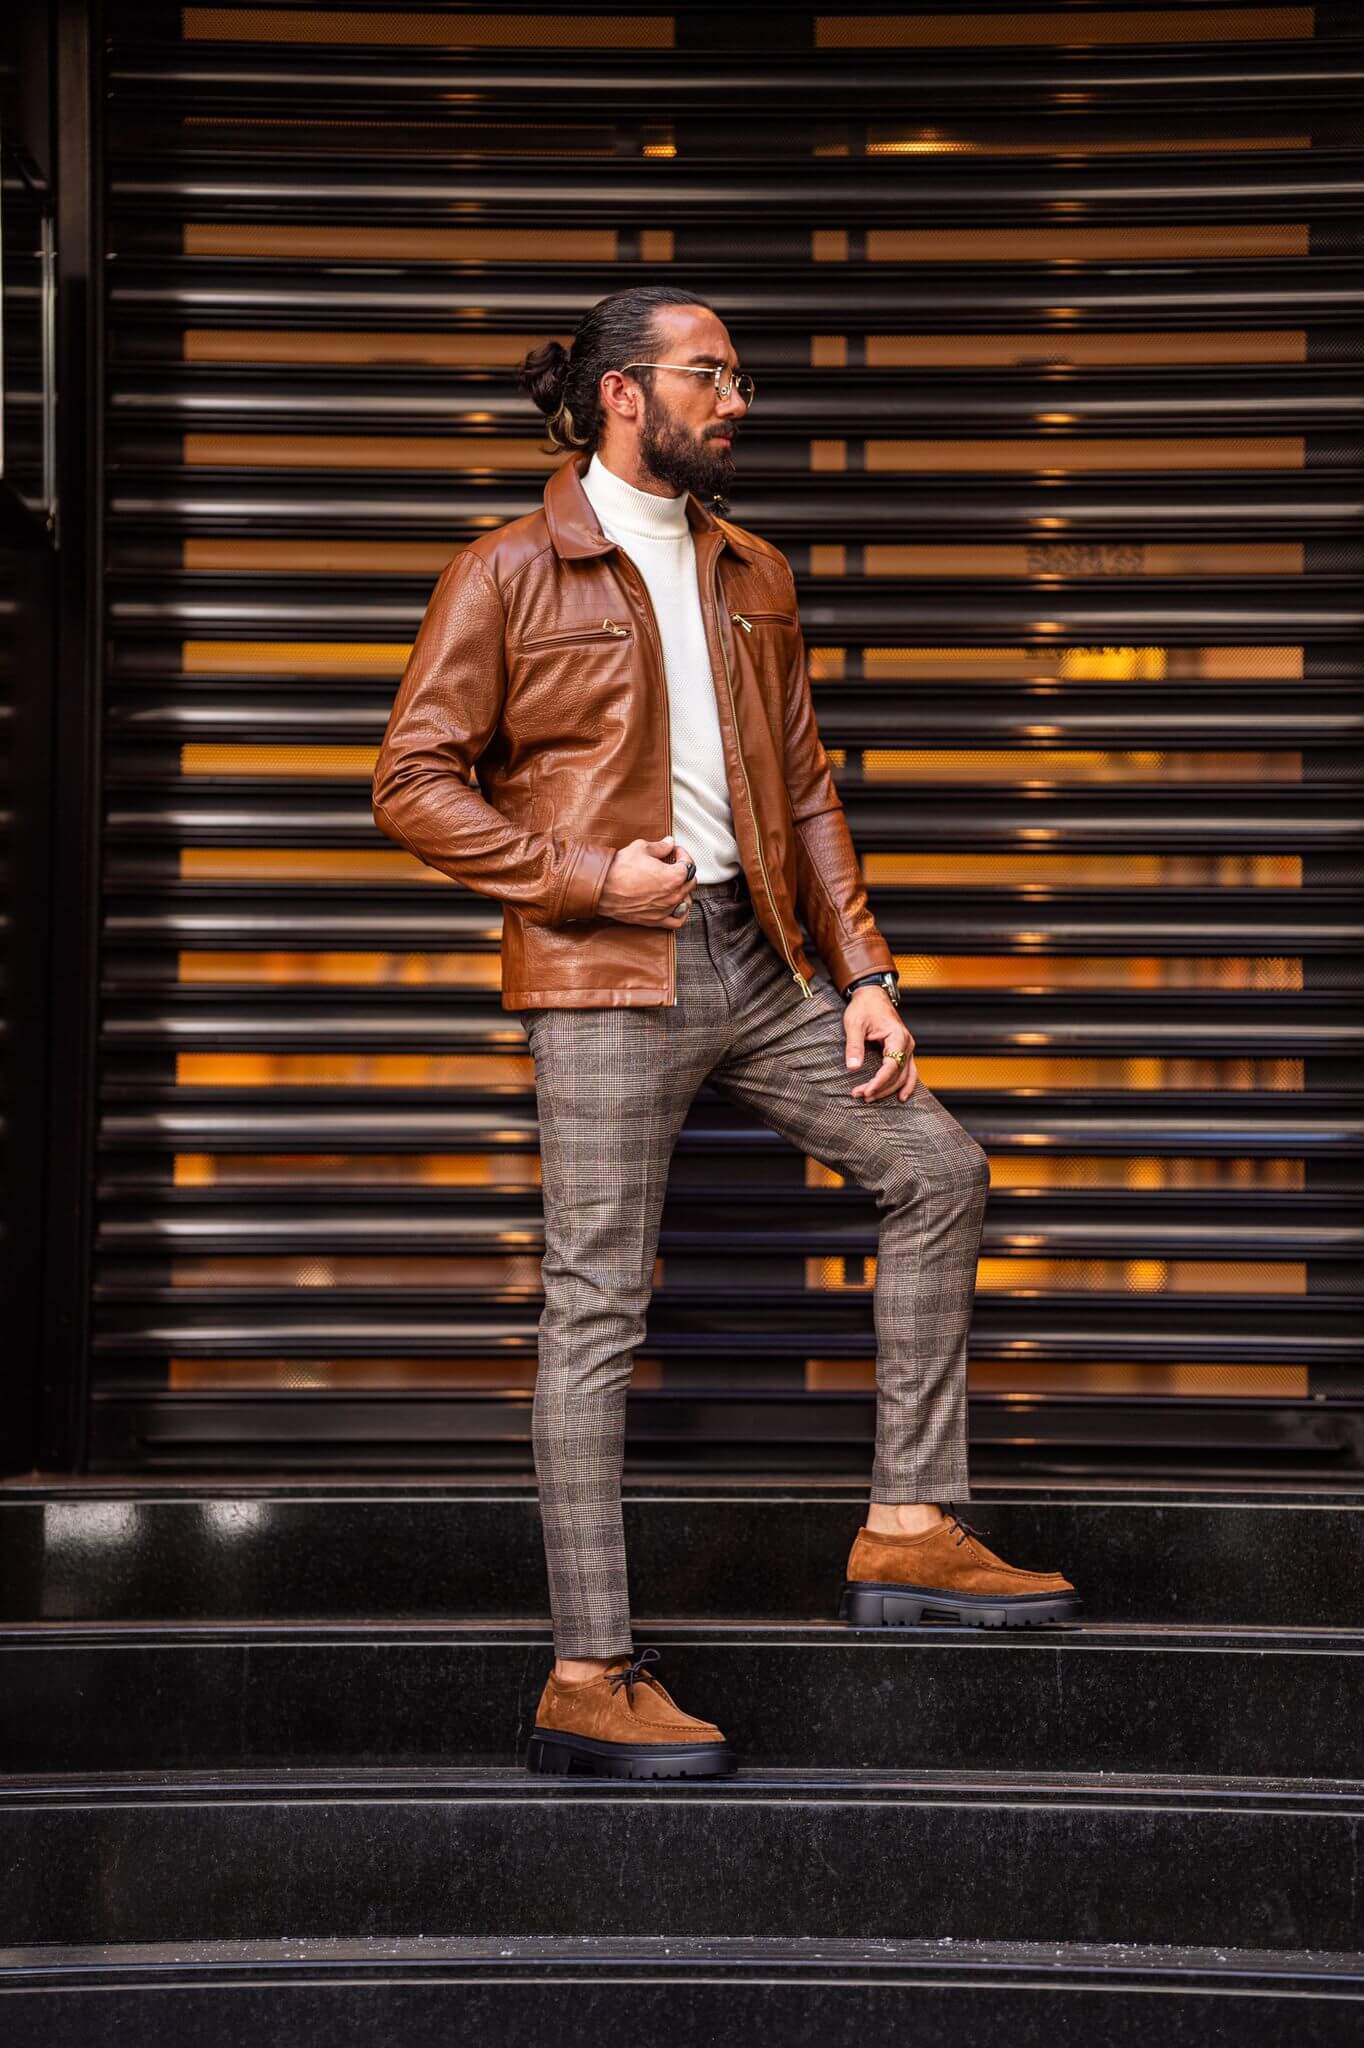 A Tan Leather Coat on display.